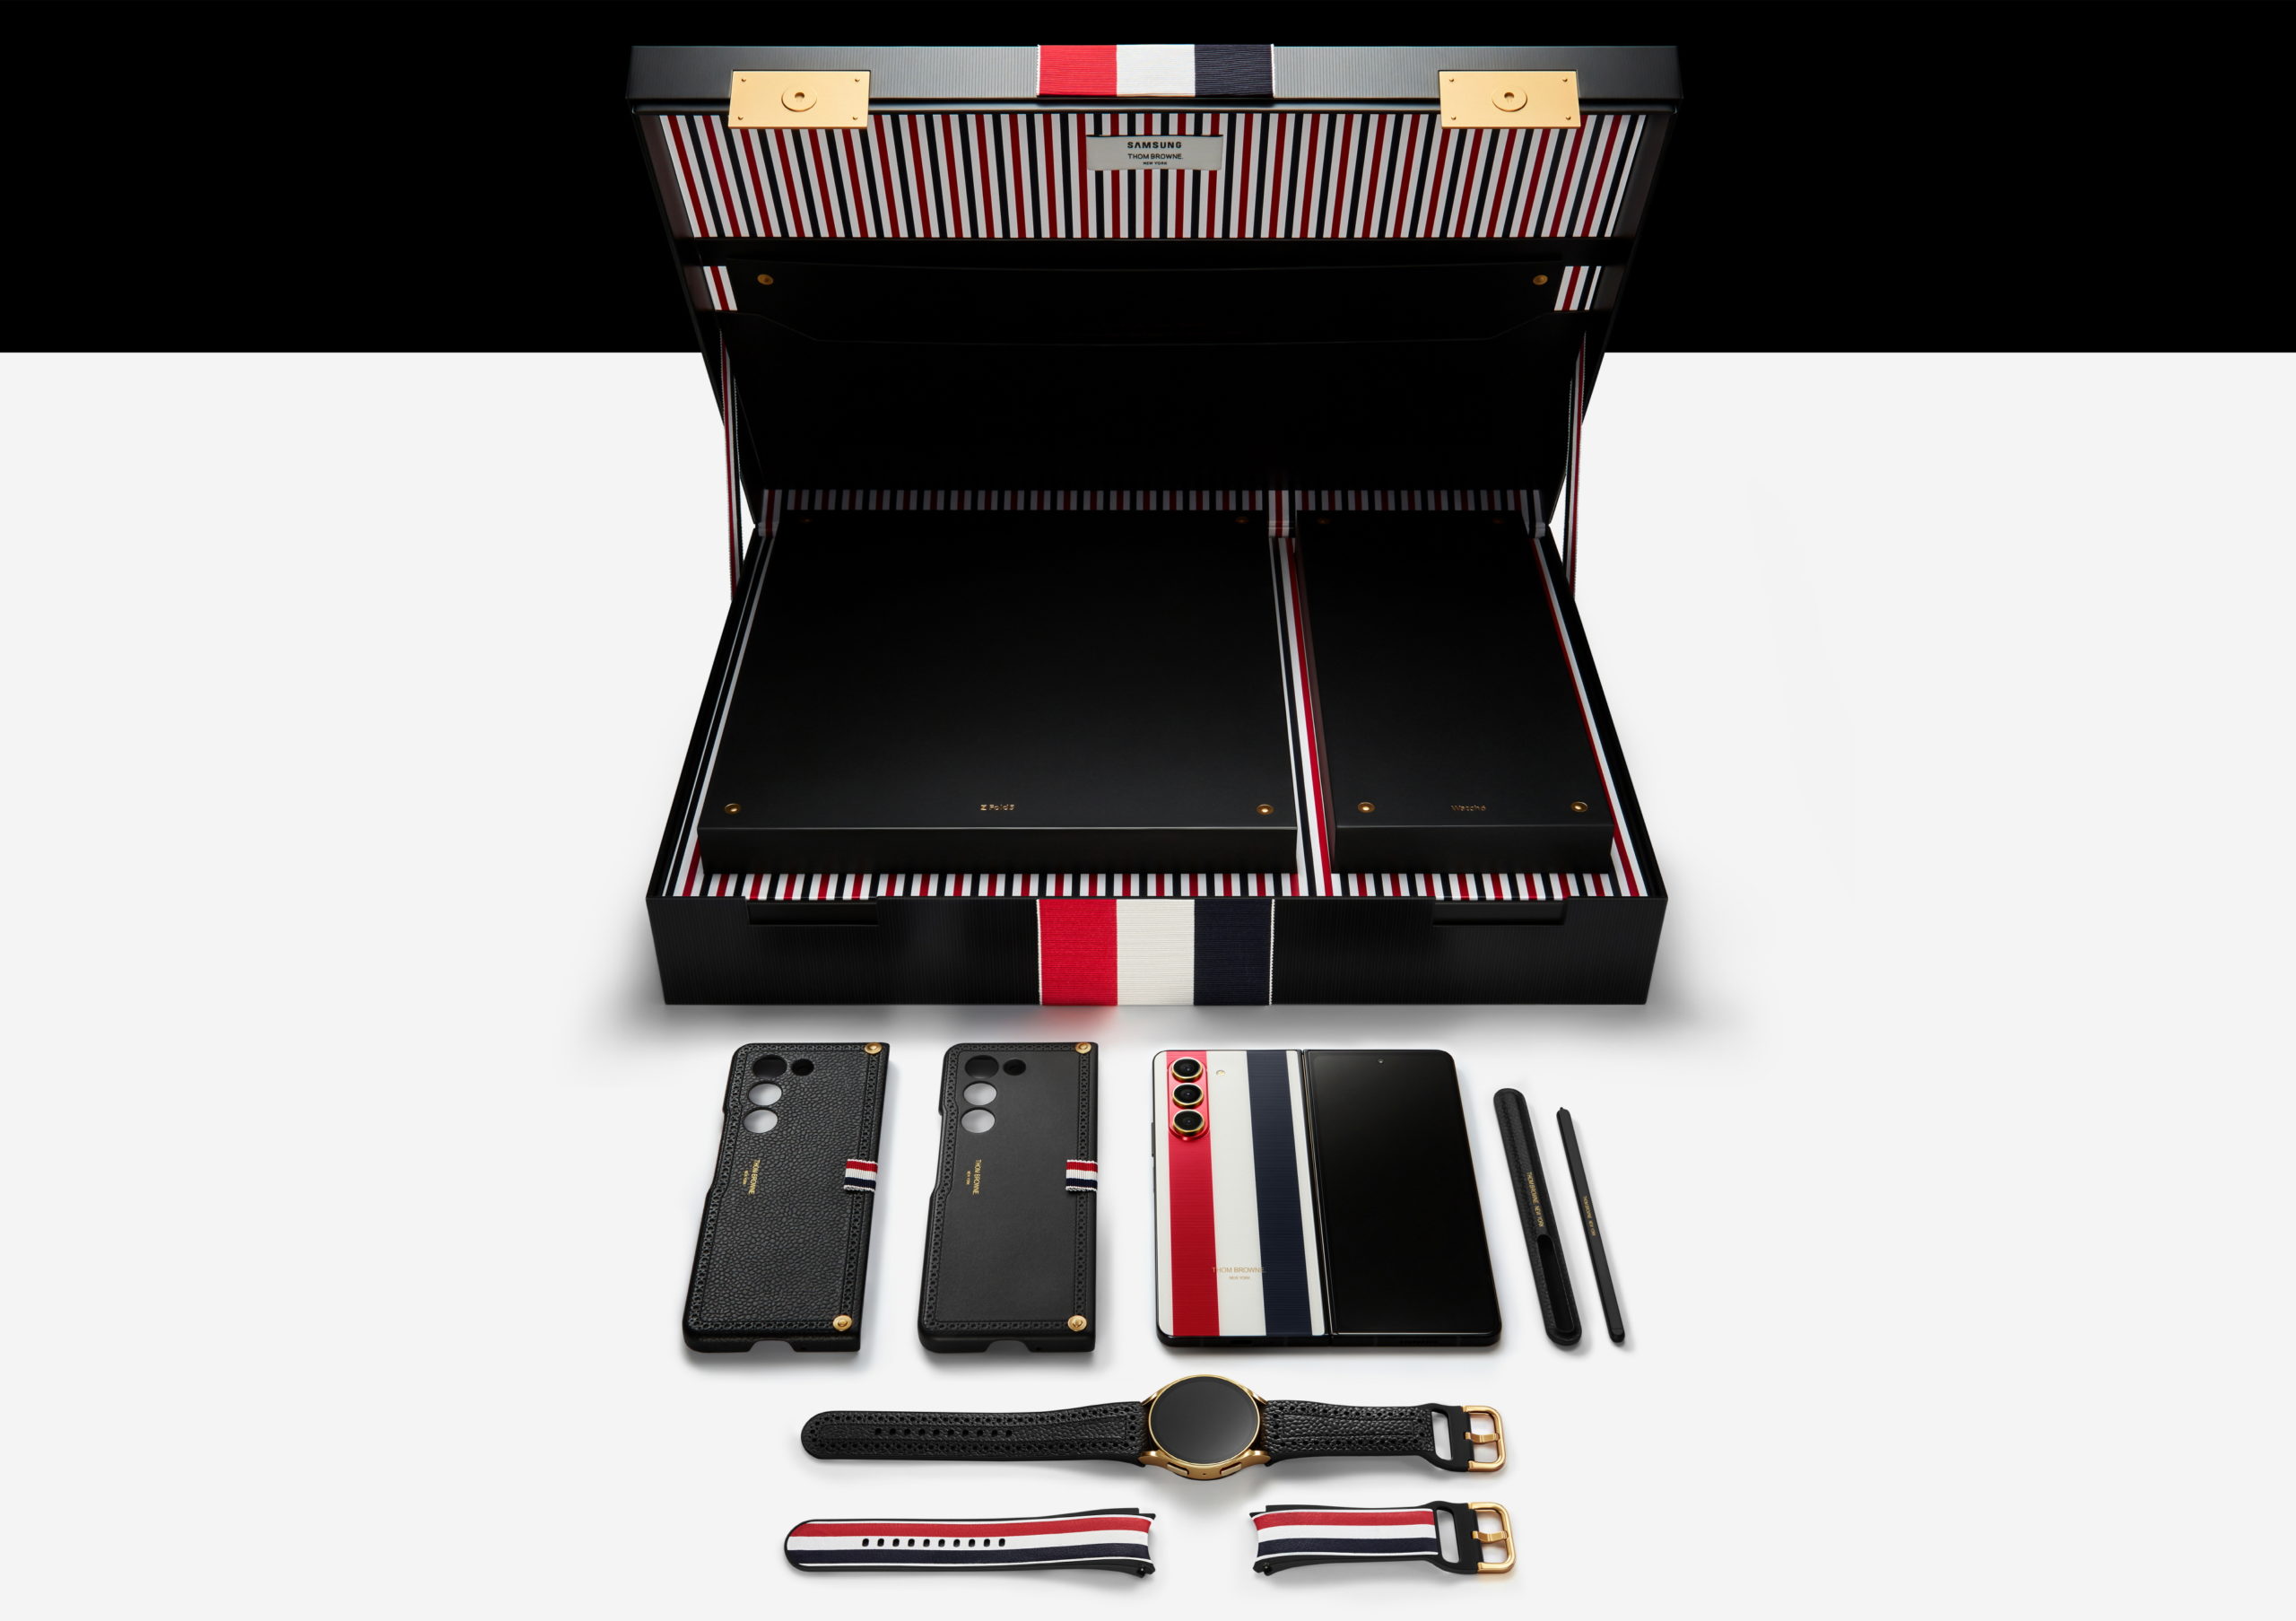 Samsung Electronics and Thom Browne Launch Special Editions of Galaxy Z ...